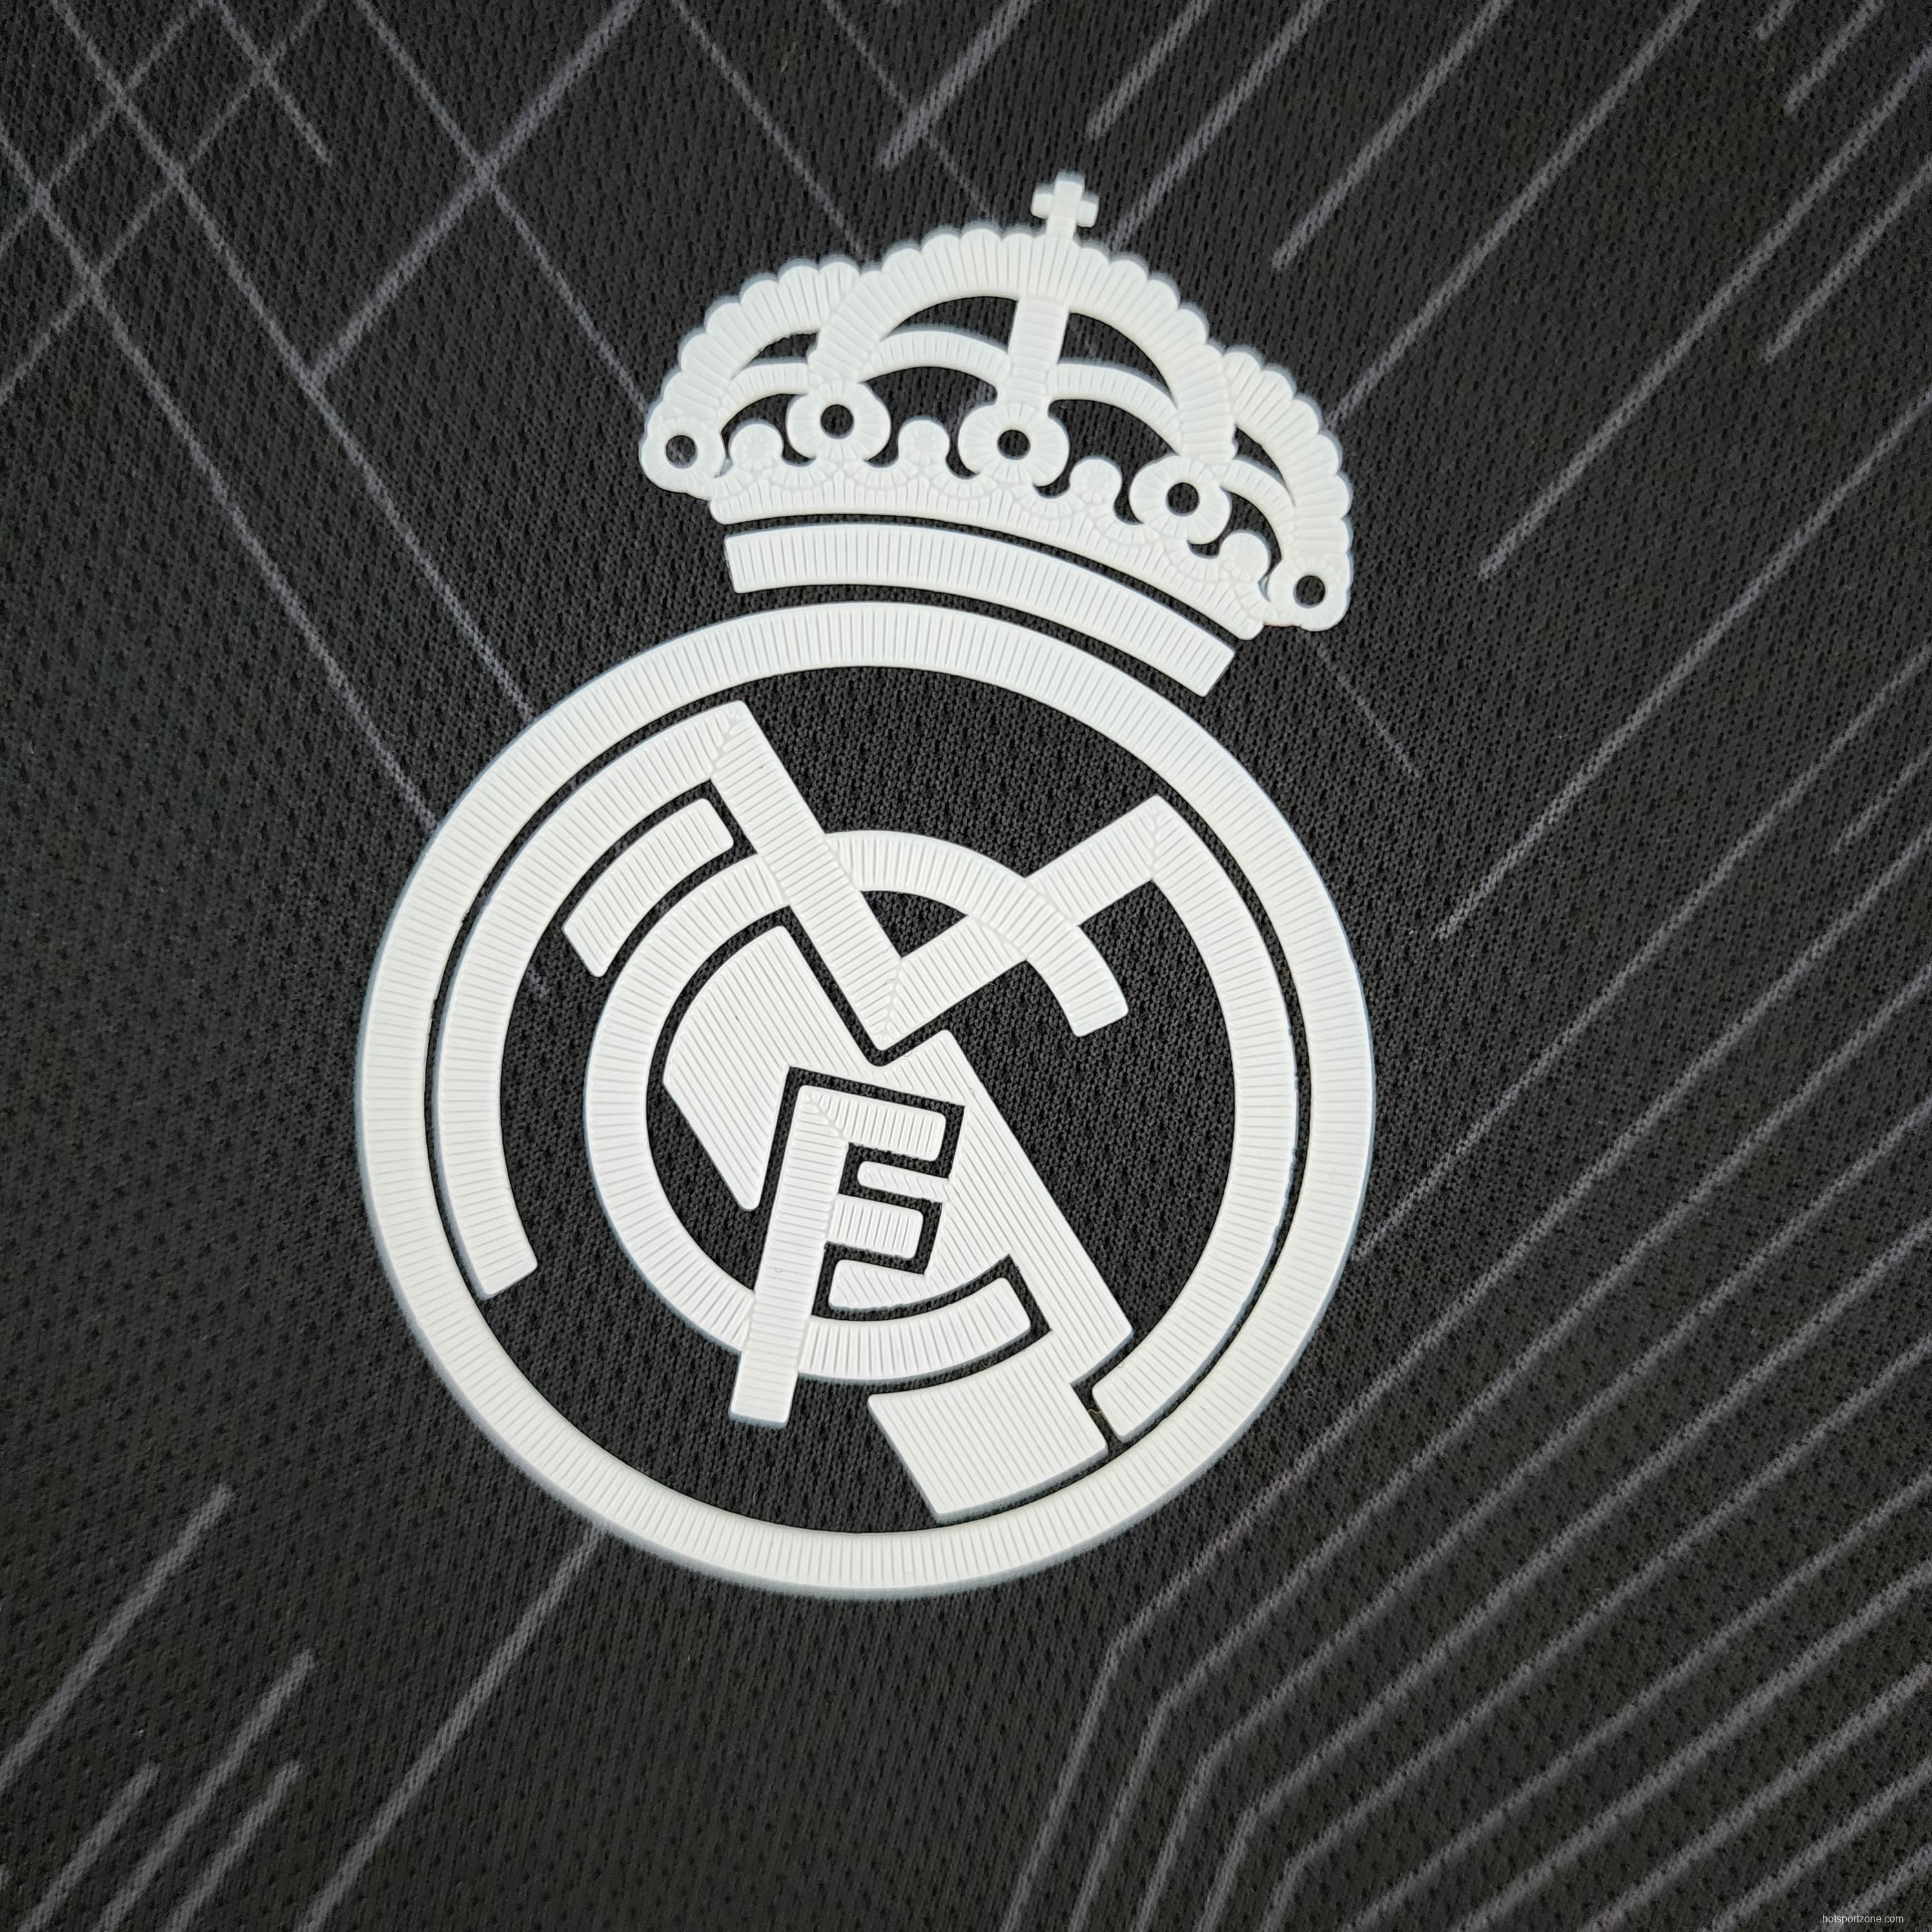 2022 Woman Real Madrid Y3 Edition Black Jersey